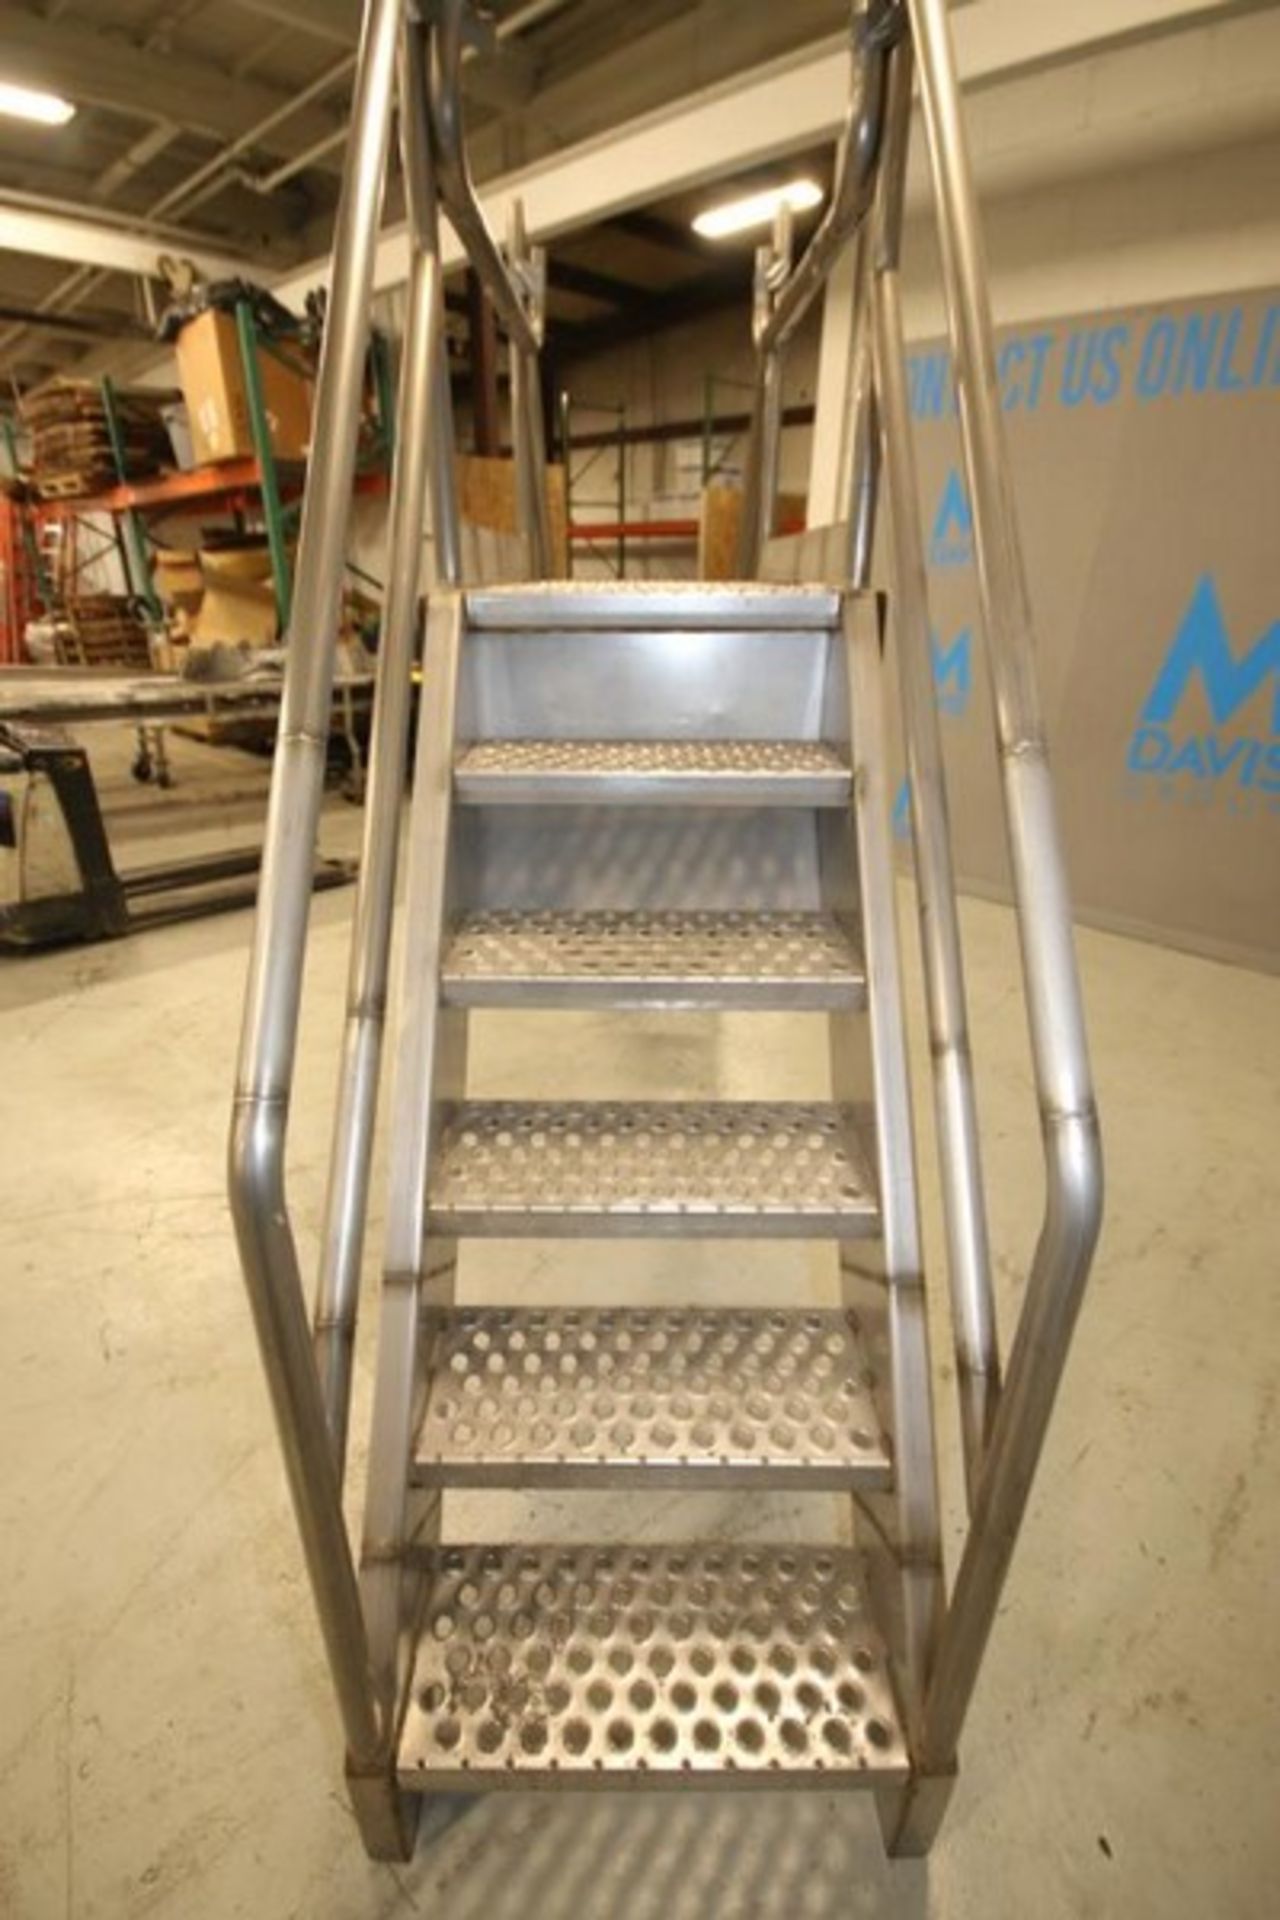 10'L x 30"W x 57"H S/S Conveyor CrossoverPlatform with Handrail & Grated Floor(INV#81394)( - Image 4 of 5